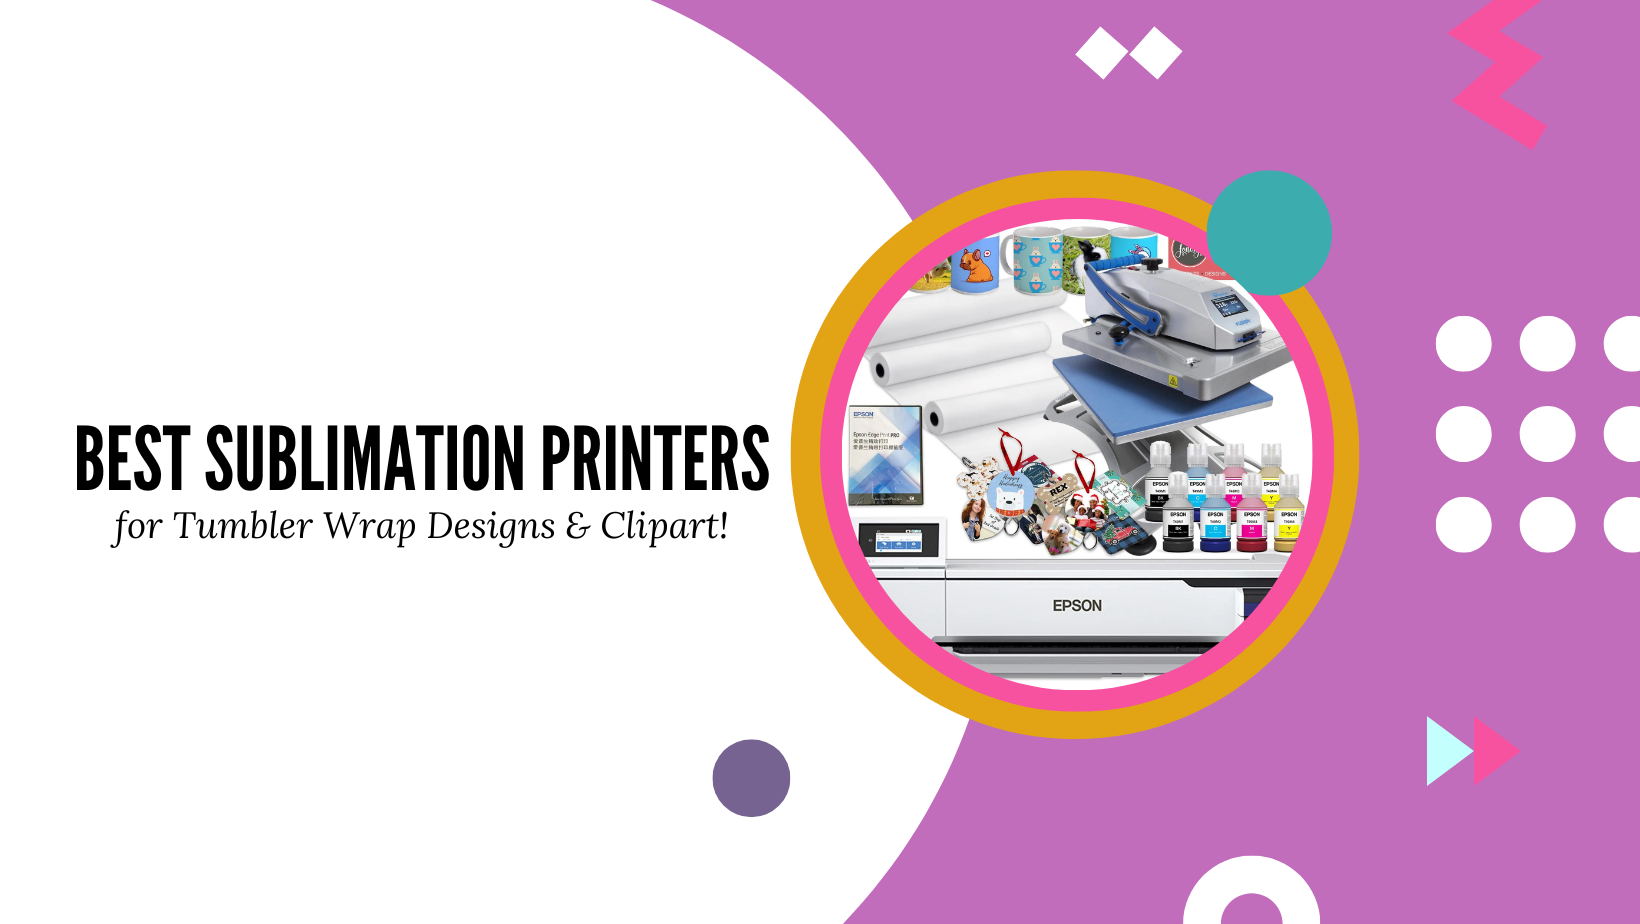 Best Sublimation Printers for Tumbler Crafting